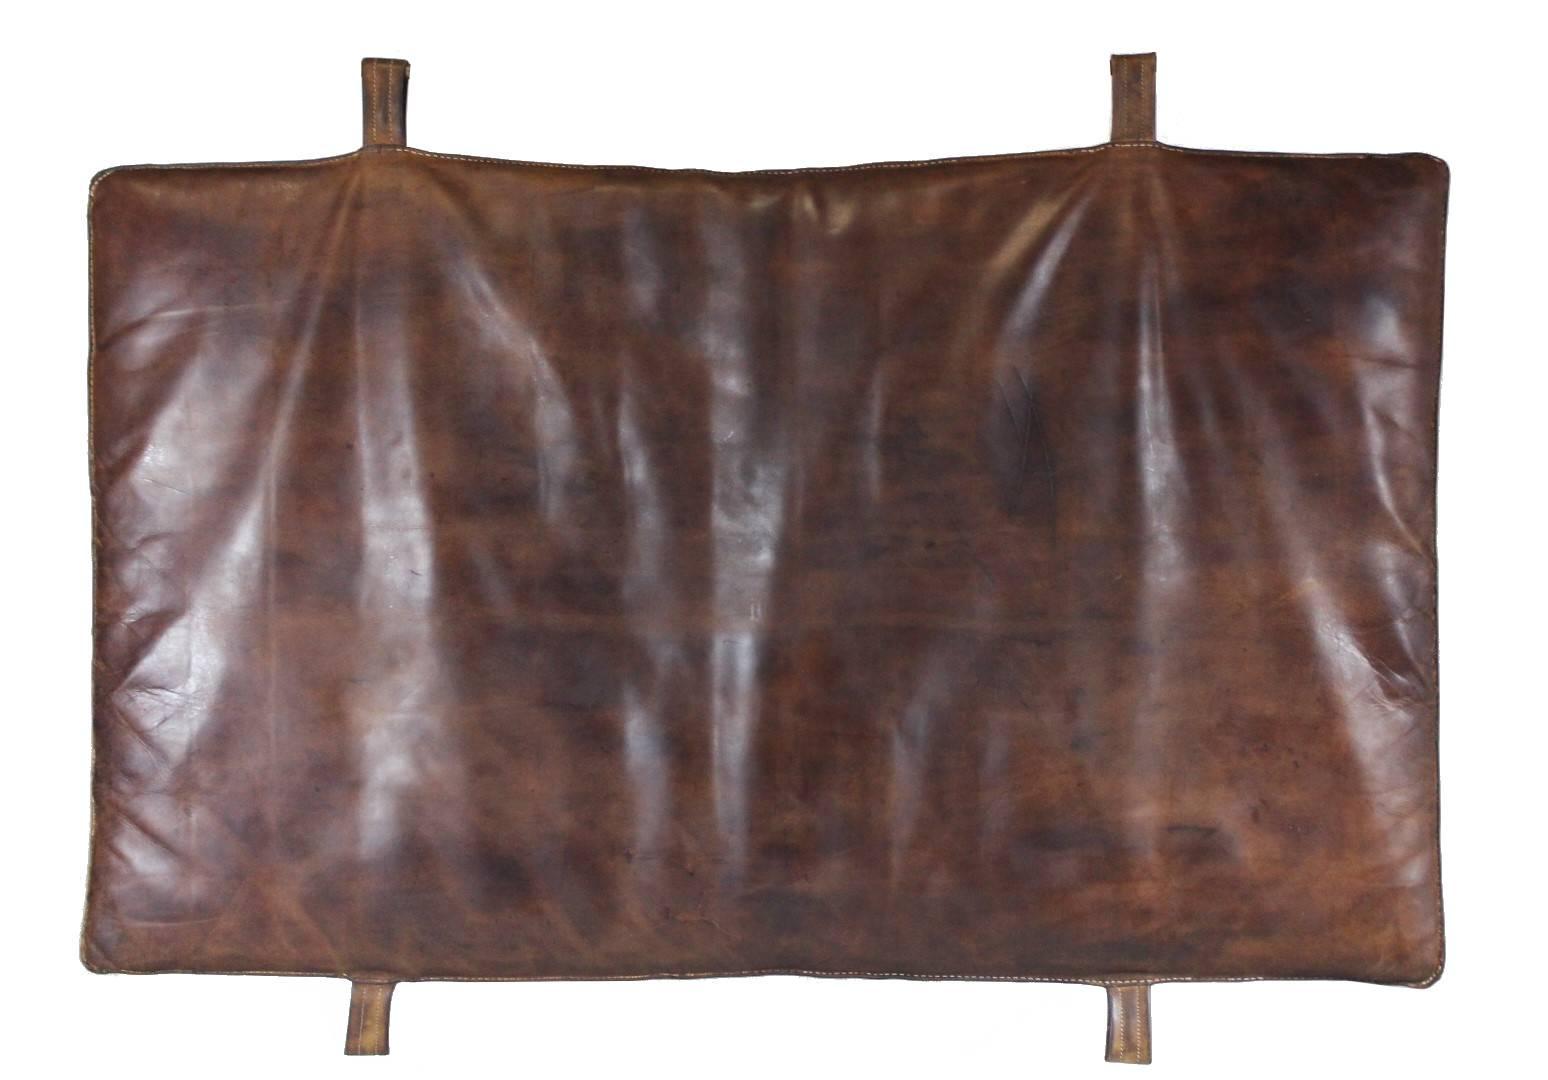 Leather gym mat from the 1930s, manufactured by Adam. It is in very good original condition.